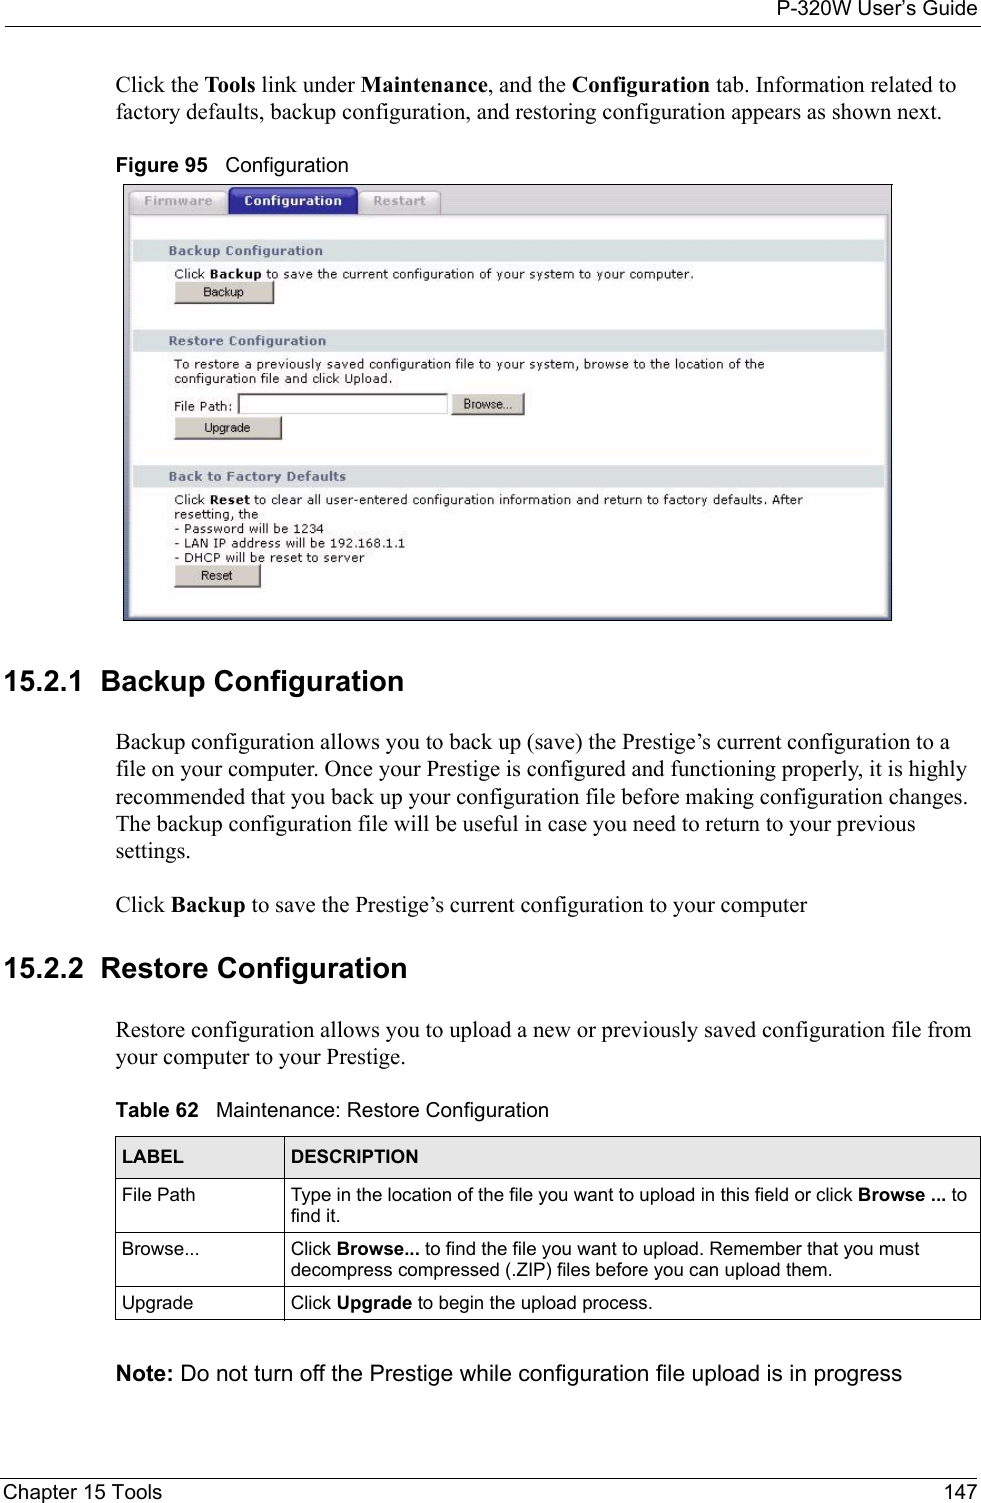 P-320W User’s GuideChapter 15 Tools 147Click the Tools link under Maintenance, and the Configuration tab. Information related to factory defaults, backup configuration, and restoring configuration appears as shown next.Figure 95   Configuration15.2.1  Backup ConfigurationBackup configuration allows you to back up (save) the Prestige’s current configuration to a file on your computer. Once your Prestige is configured and functioning properly, it is highly recommended that you back up your configuration file before making configuration changes. The backup configuration file will be useful in case you need to return to your previous settings. Click Backup to save the Prestige’s current configuration to your computer15.2.2  Restore ConfigurationRestore configuration allows you to upload a new or previously saved configuration file from your computer to your Prestige.Table 62   Maintenance: Restore ConfigurationLABEL DESCRIPTIONFile Path  Type in the location of the file you want to upload in this field or click Browse ... to find it.Browse...  Click Browse... to find the file you want to upload. Remember that you must decompress compressed (.ZIP) files before you can upload them. Upgrade  Click Upgrade to begin the upload process.Note: Do not turn off the Prestige while configuration file upload is in progress